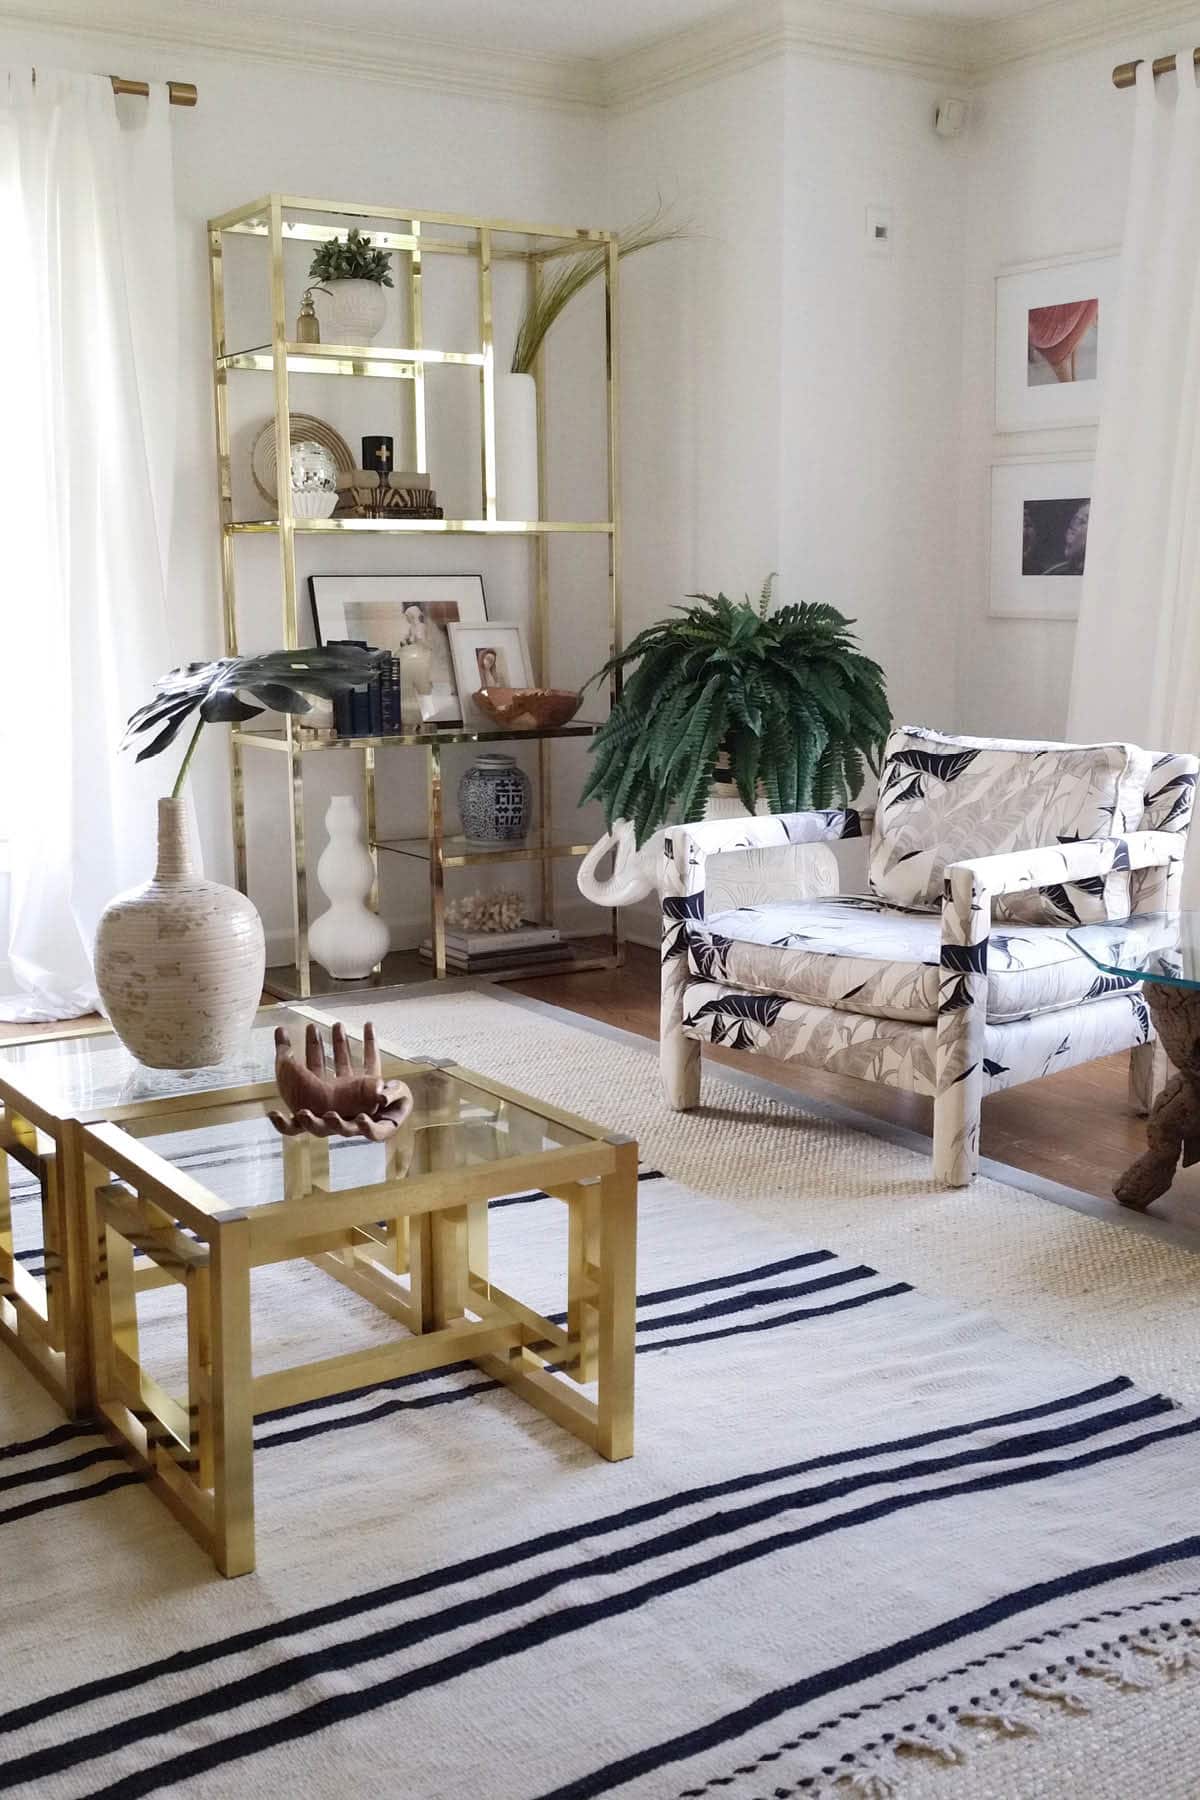 How to choose the best rug for your living room